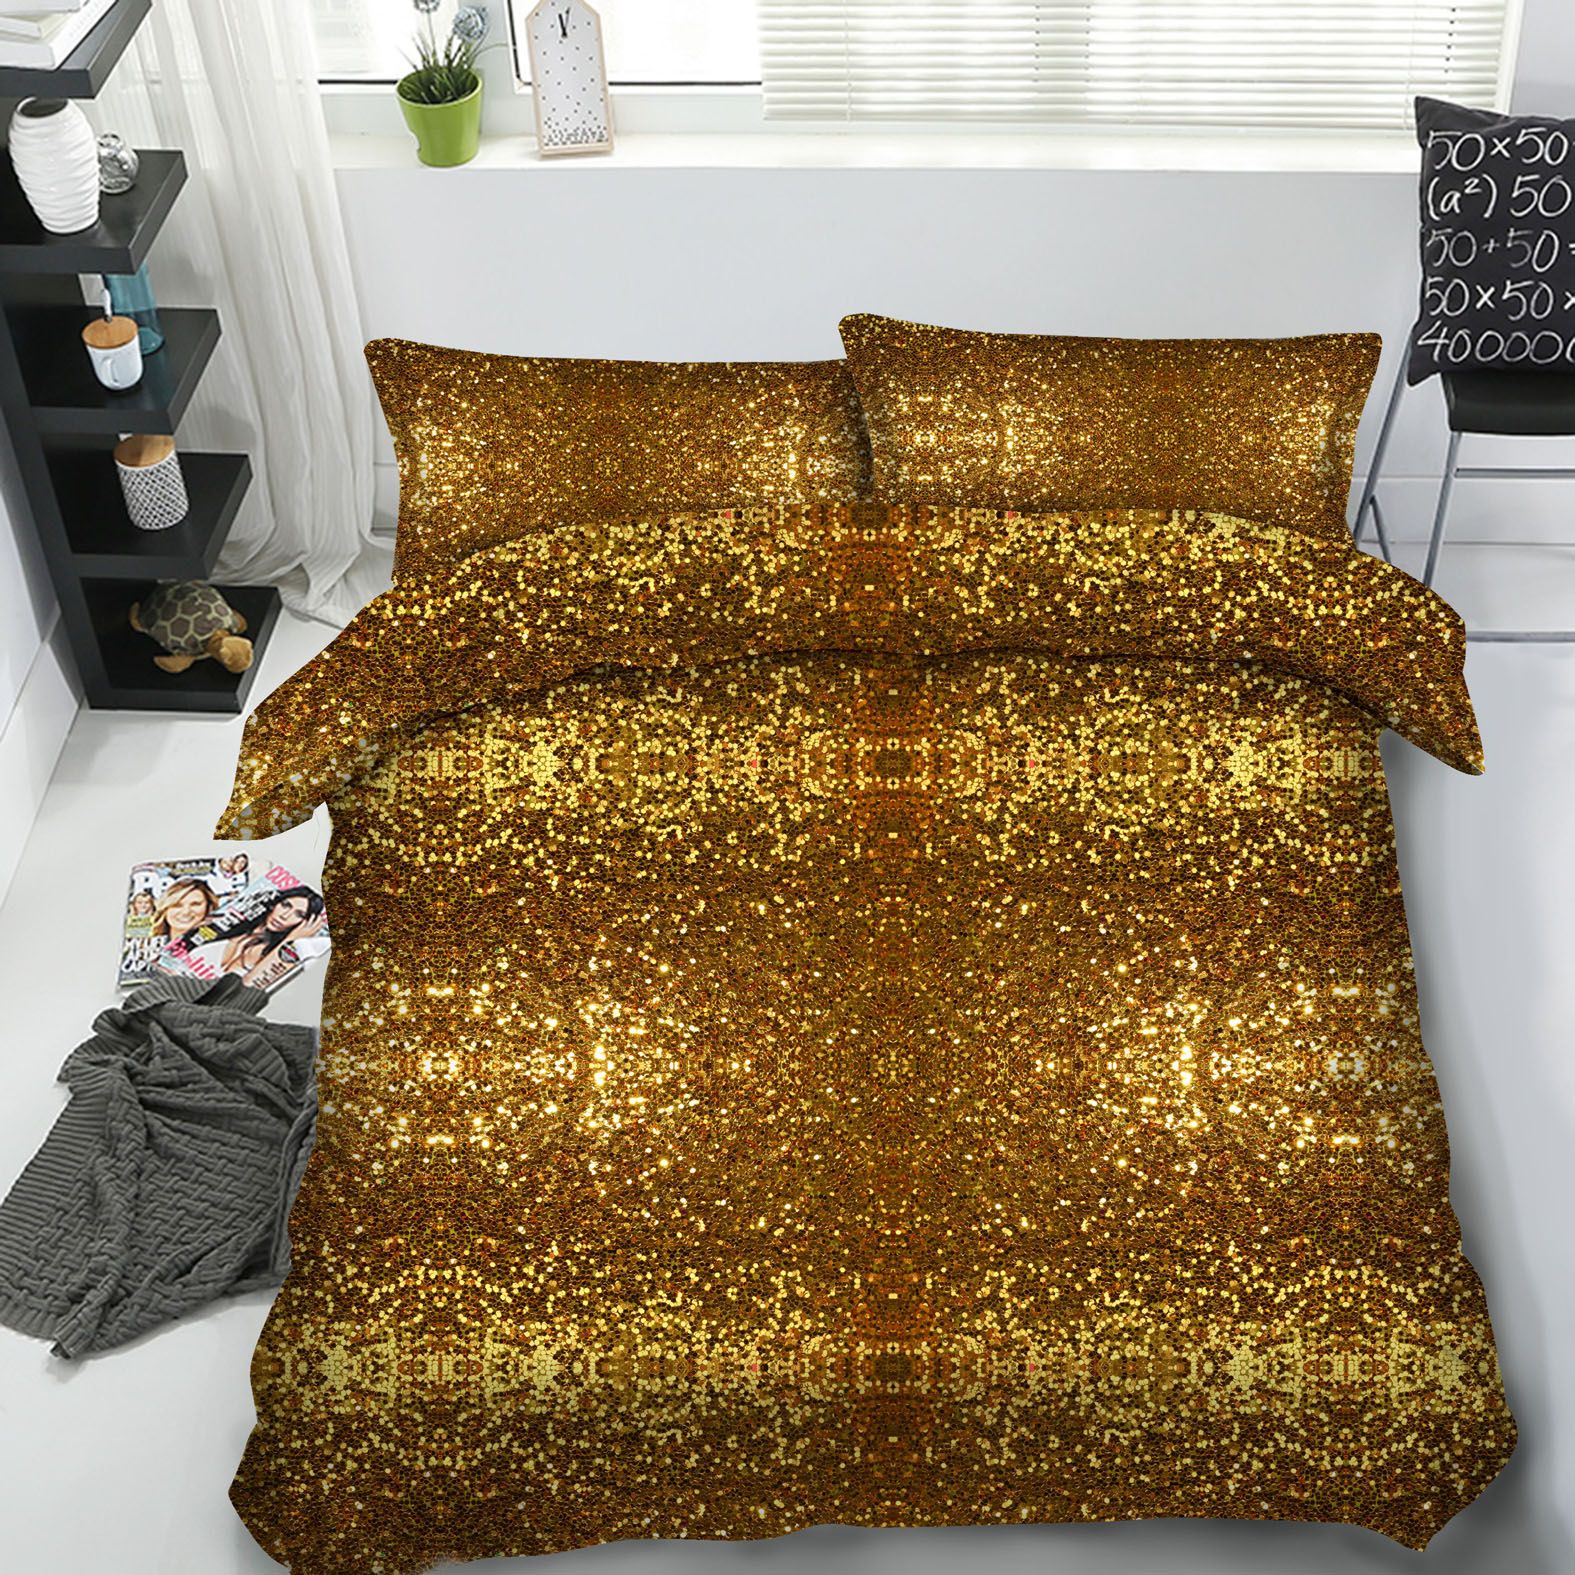 3d Printed Golden Color Bedding Set Twin Full Queen King Size